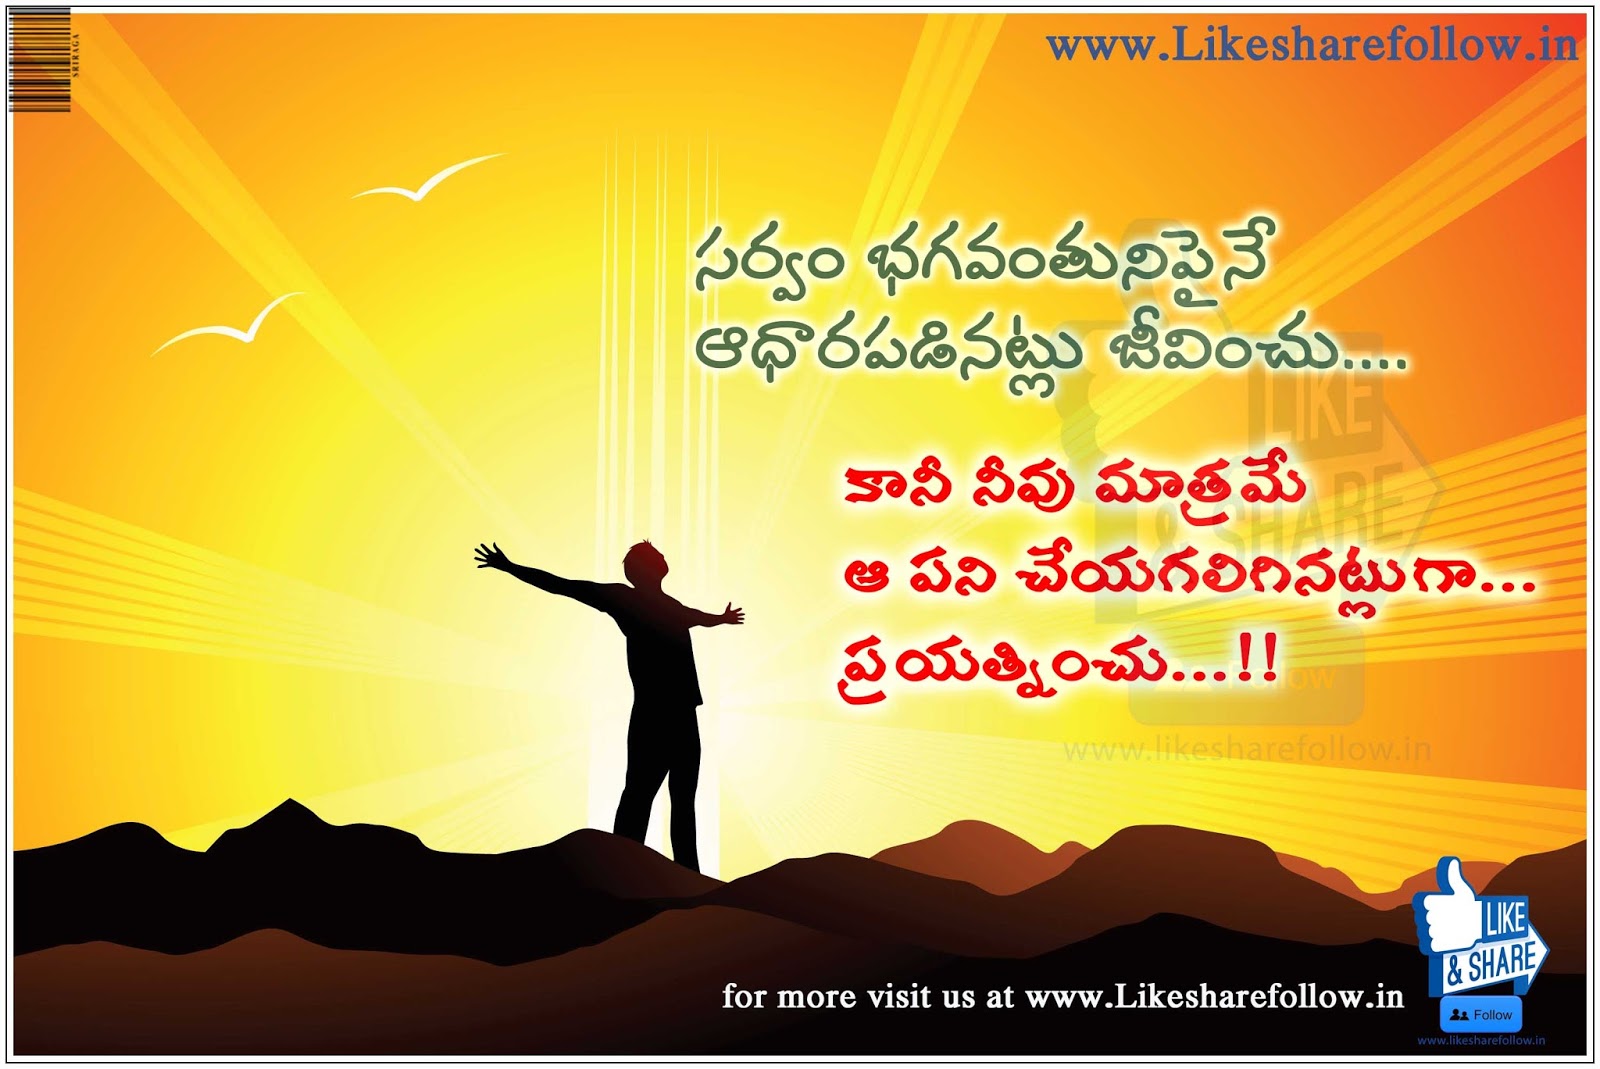 Good morning Telugu Quotations with god thoughts | Like Share Follow